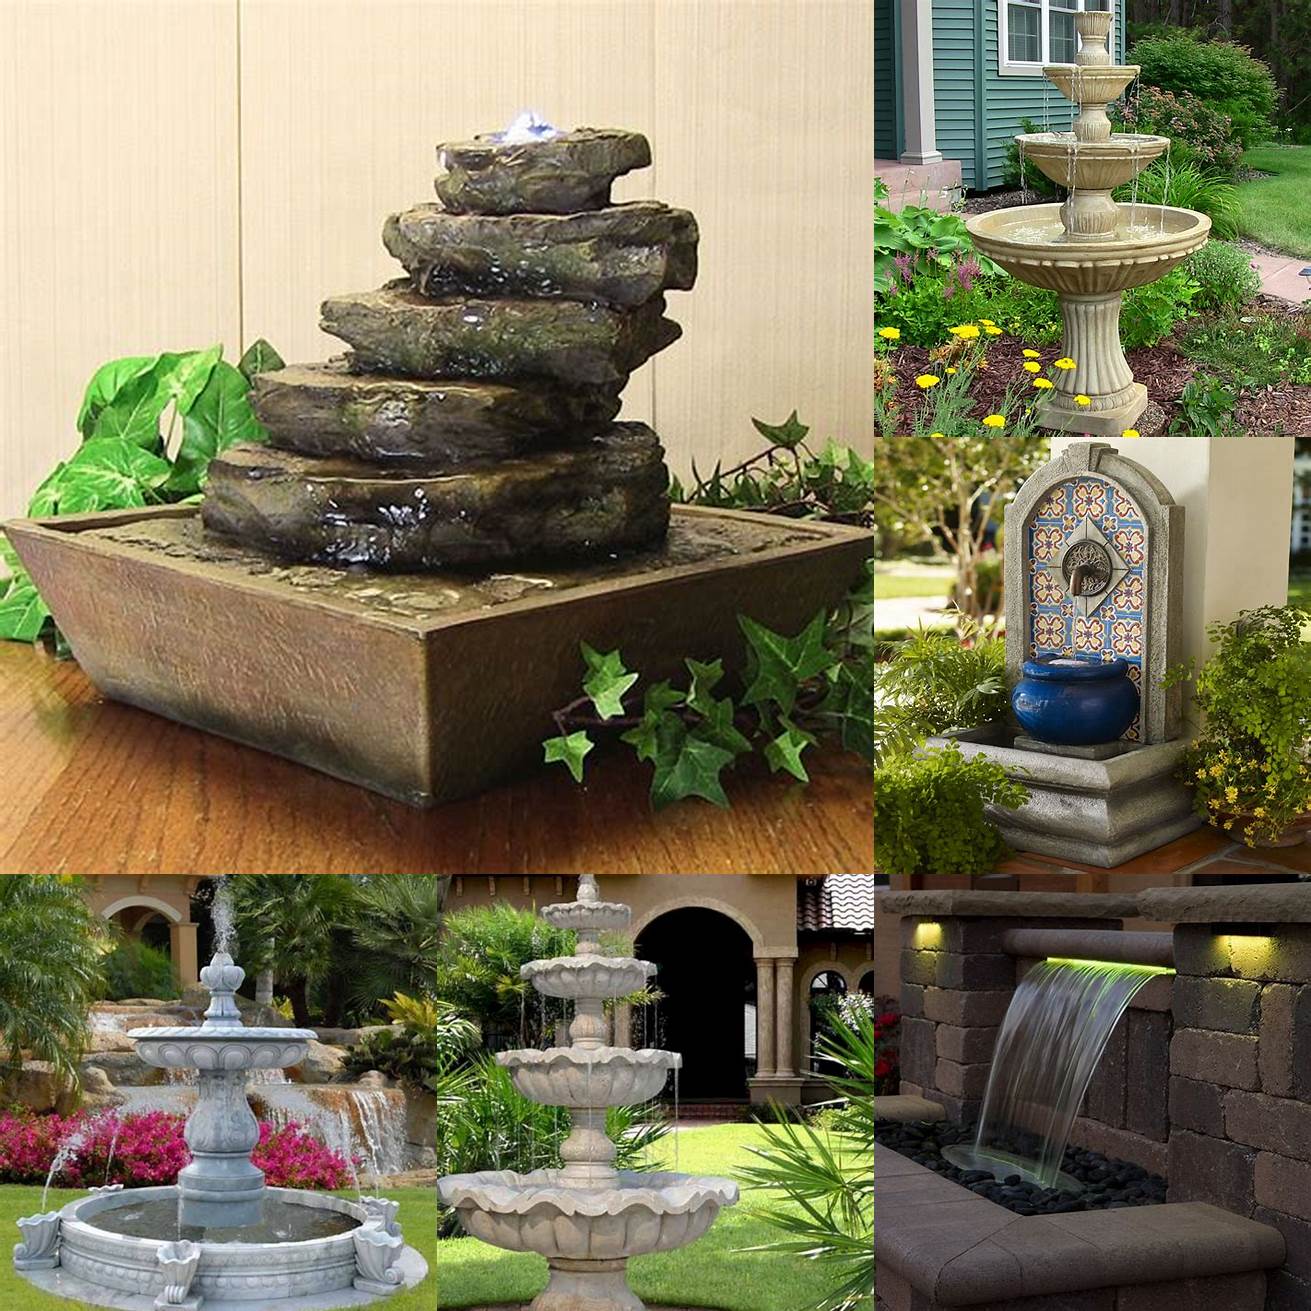 Stylish and attractive Water fountains come in different designs and colors that can complement your home décor and add a touch of style and elegance